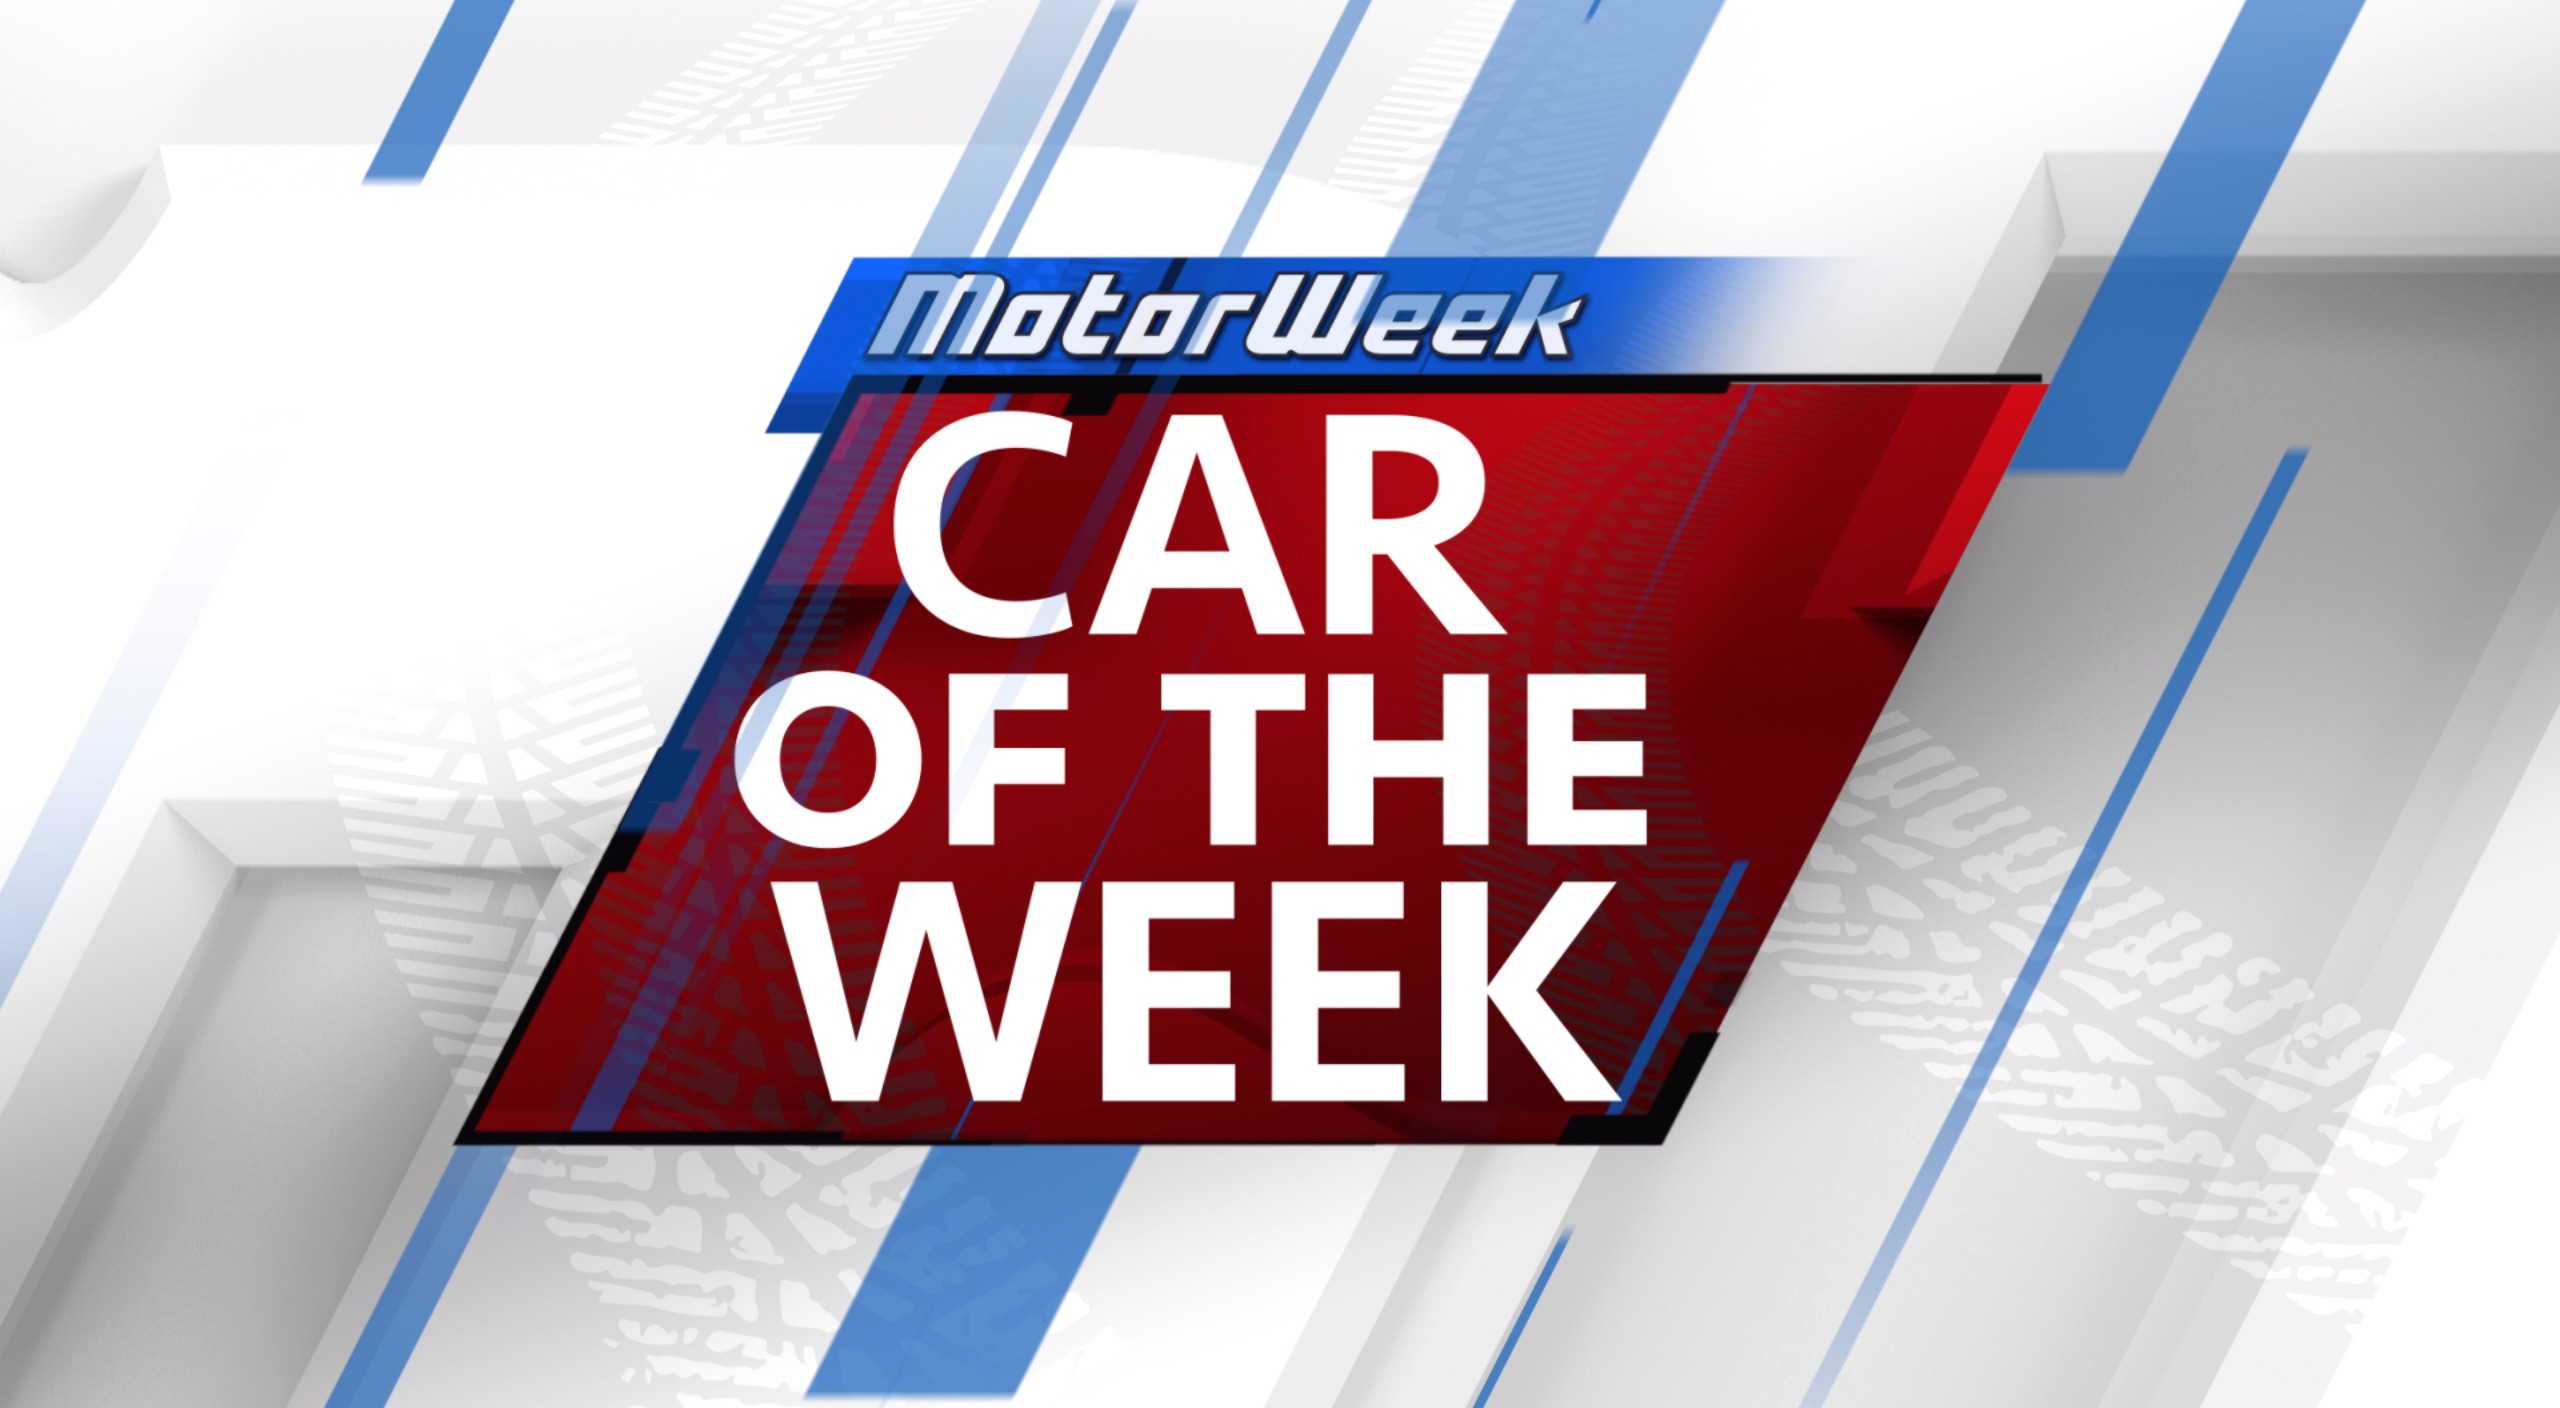 Submissions are Open for MotorWeek’s 40th Season “Car of the Week”